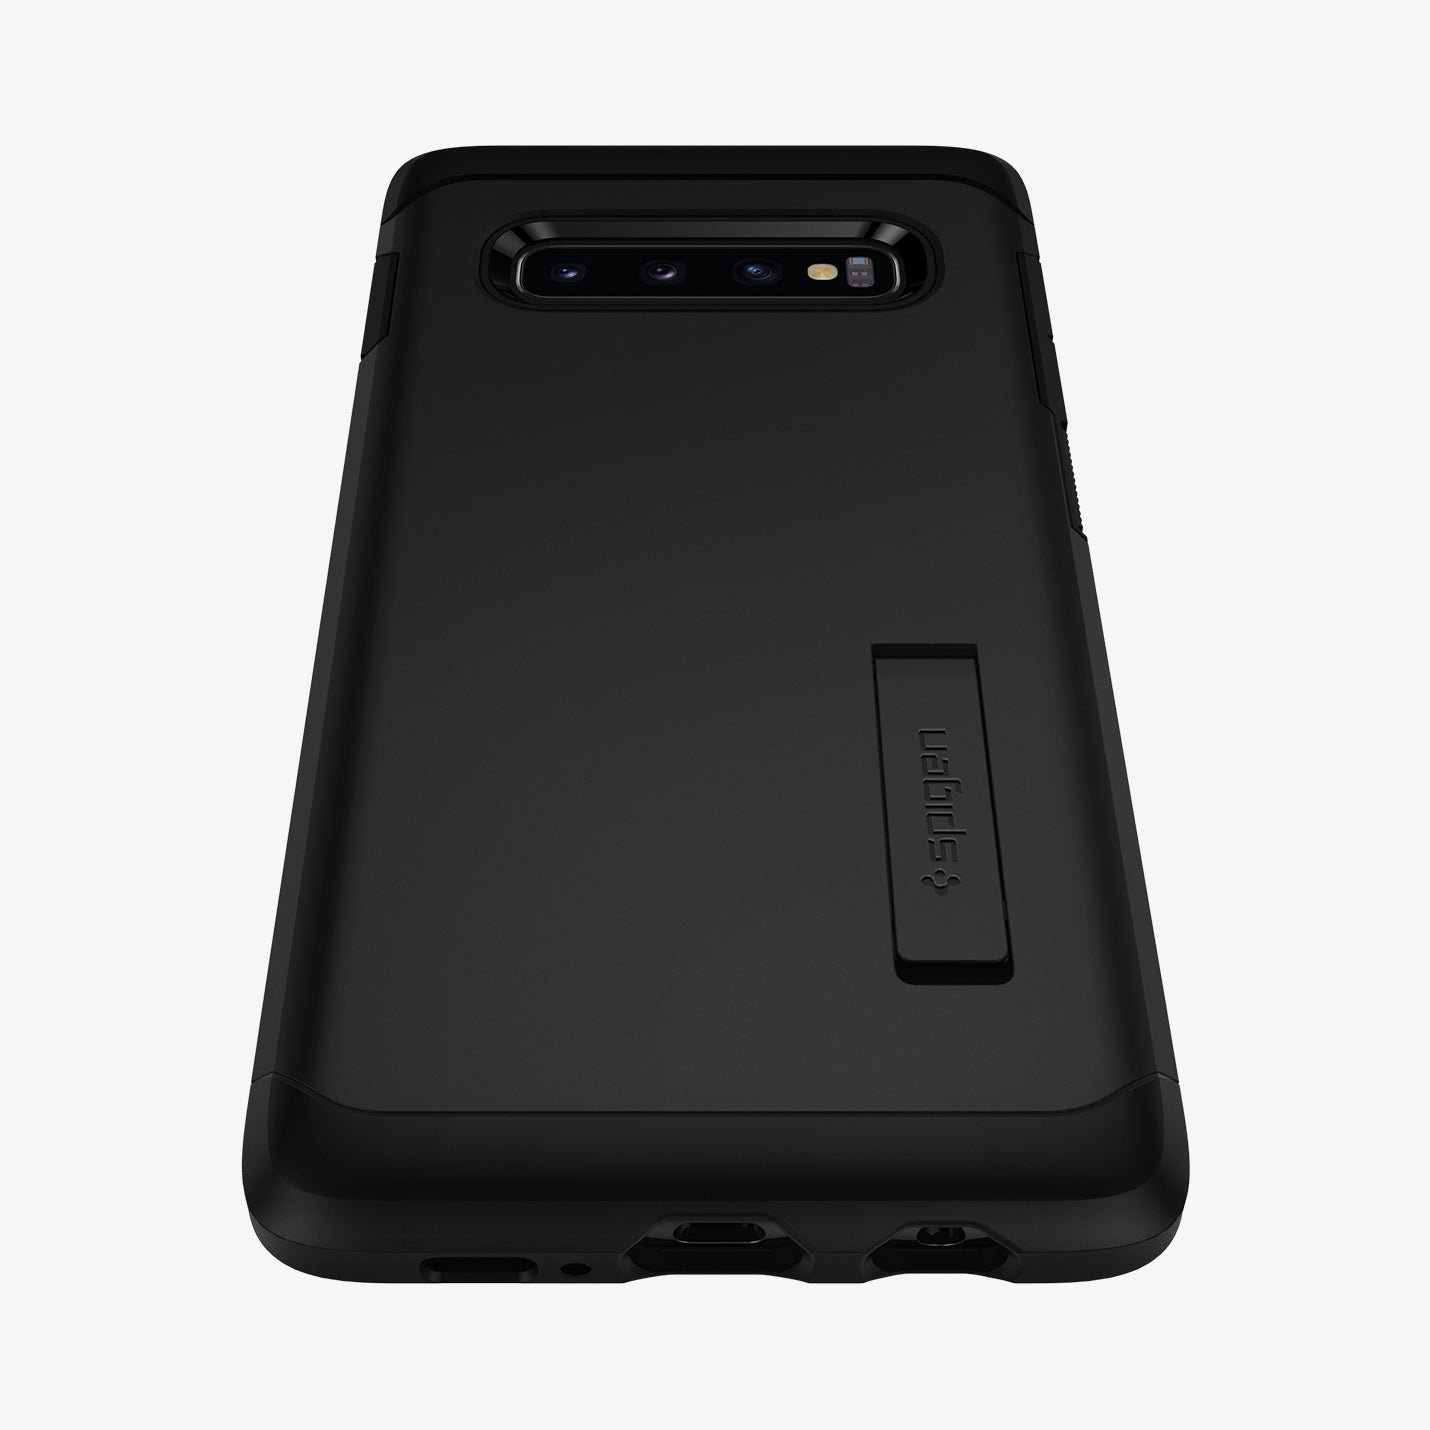 606CS25770 - Galaxy S10 Plus Tough Armor Case in black showing the back and bottom zoomed in